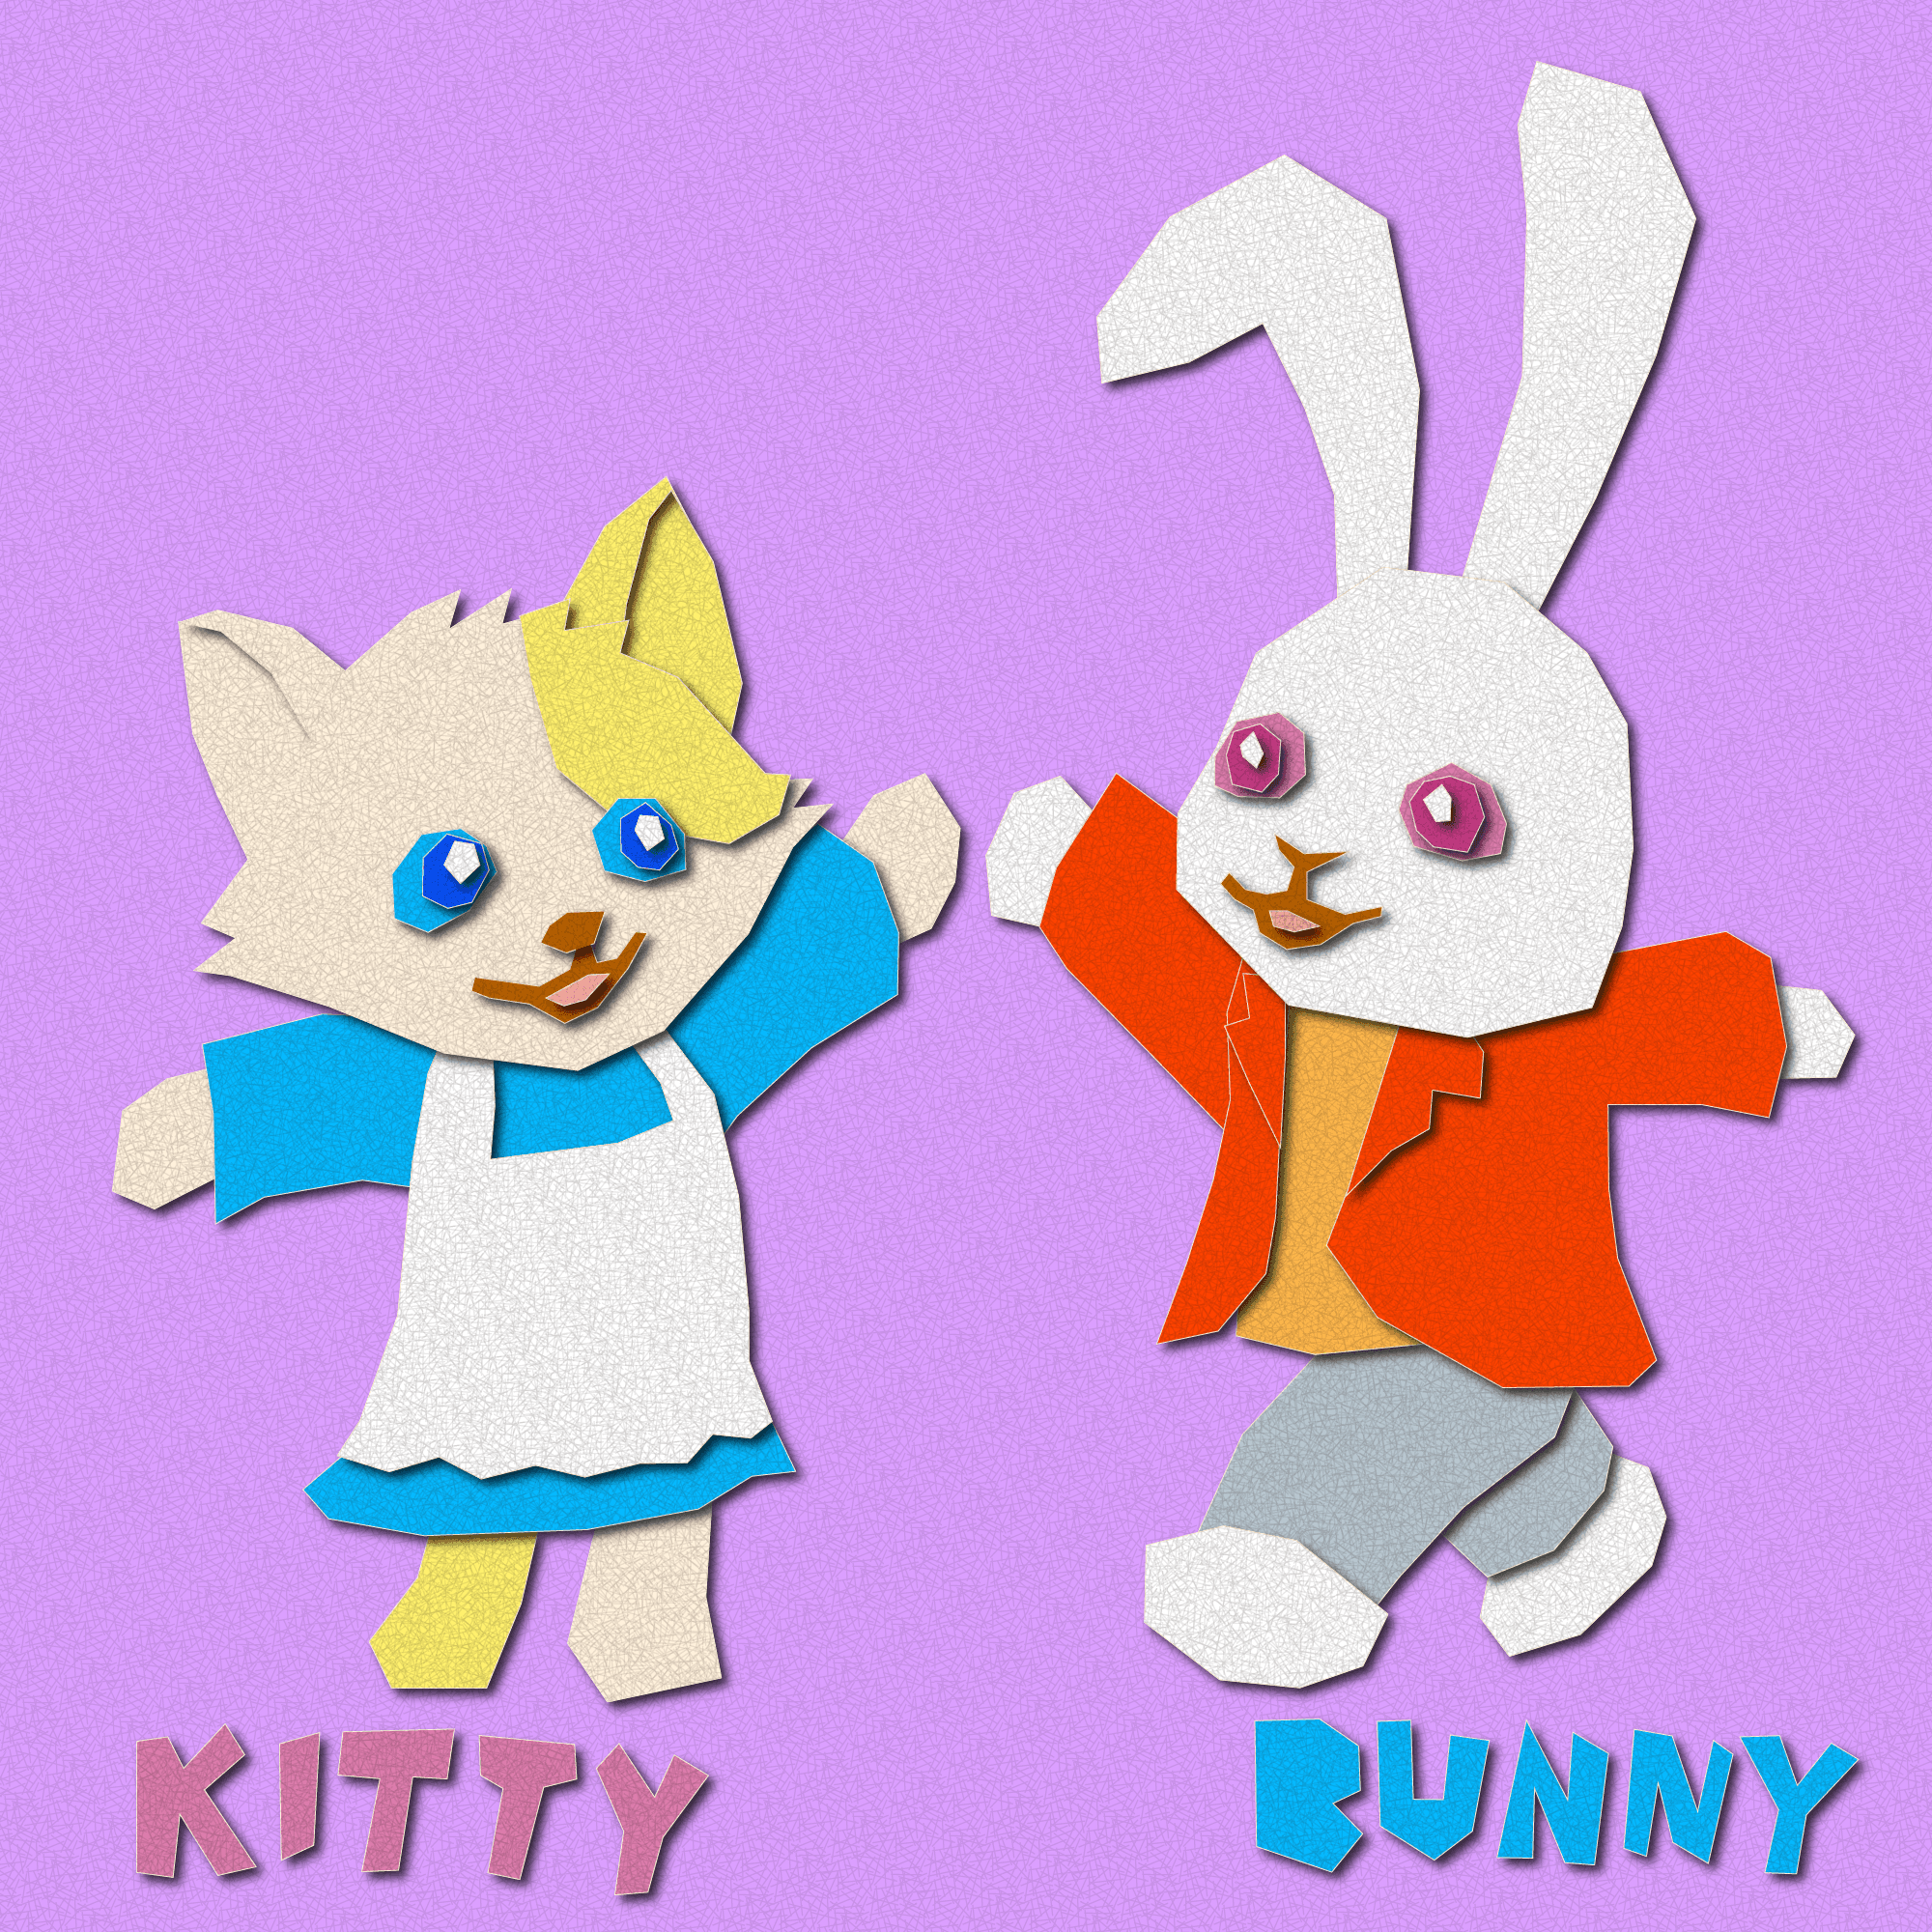 PaperCraft / Kitty and Bunny